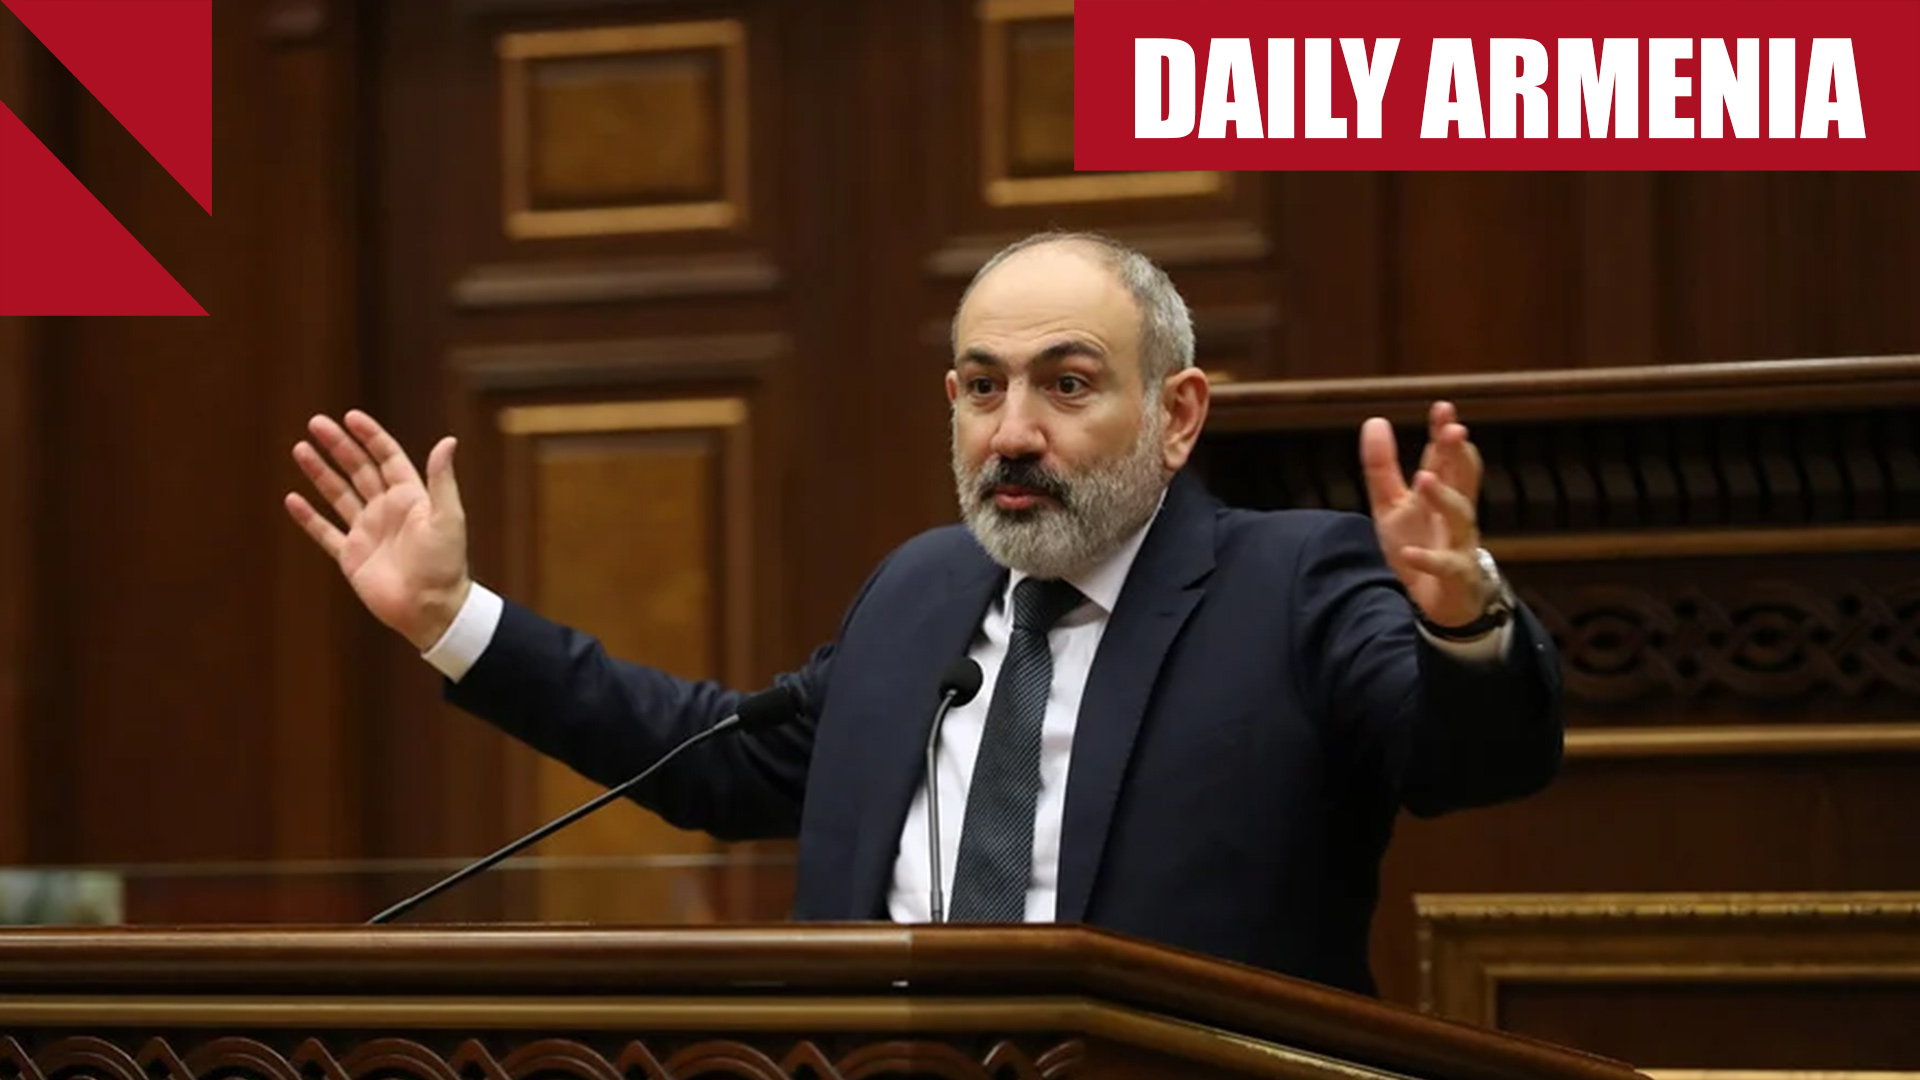 Pashinyan: Armenia should hand over 4 border villages to avoid new war